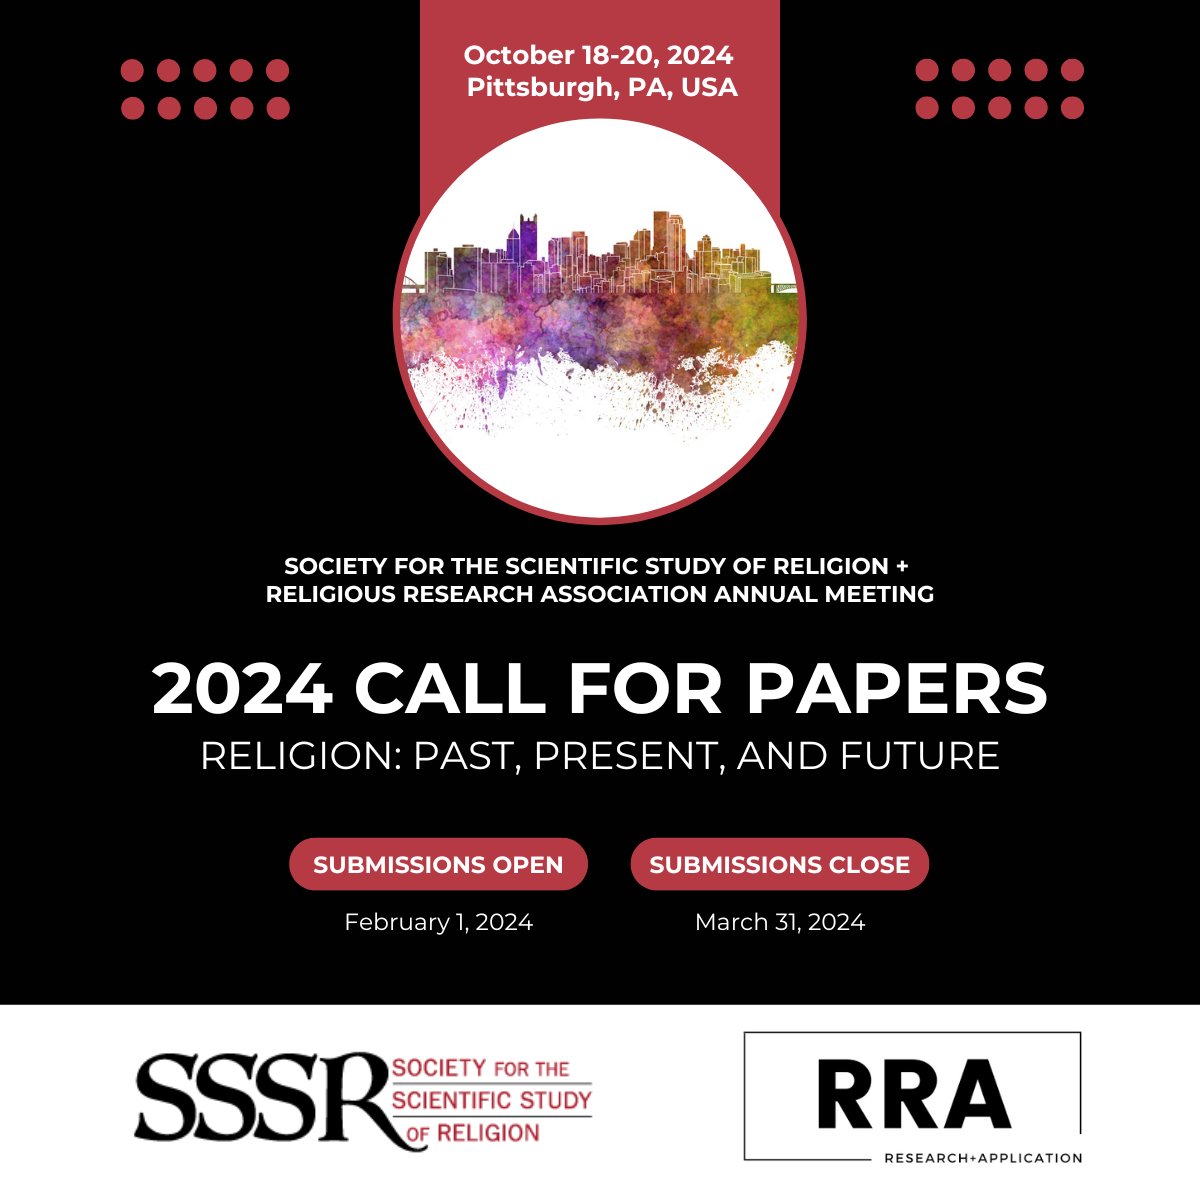 Planning paper sessions, book panels or individual proposals for #SSSR_RRA2024? We invite proposals that draw us to revisit the past, insightfully engage the present, or provocatively consider the future on matters both intimate and global. sssreligion.org/annual-meeting…